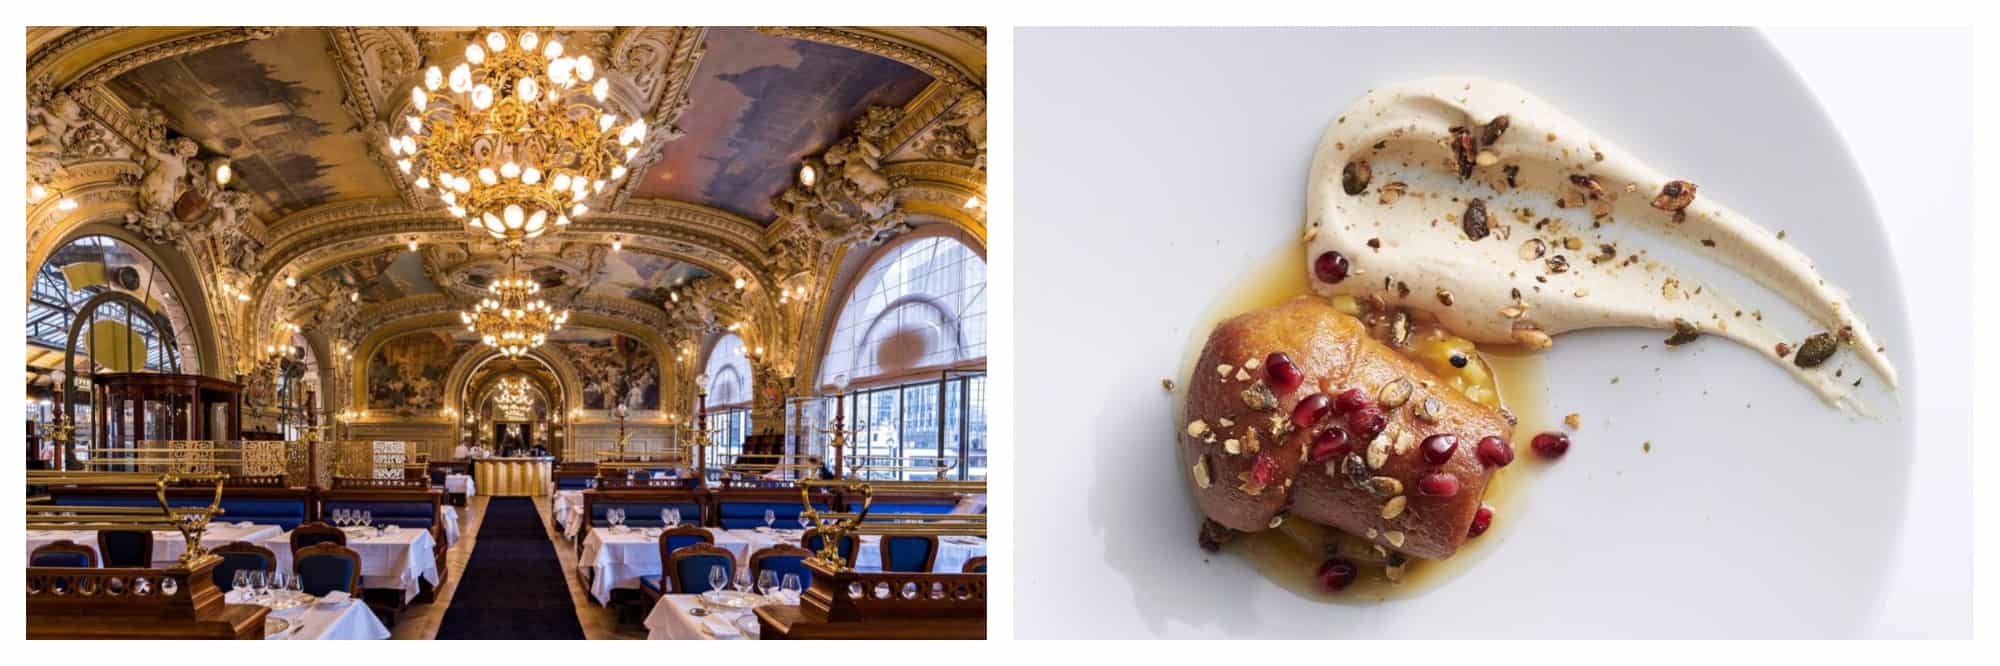 The opulent interior of the restaurant Le Train Bleu in Paris, featuring painted frescos and gold chandeliers (left). A bird's eye view of the rum baba dessert from the restaurant Fouquet's in Paris (right).